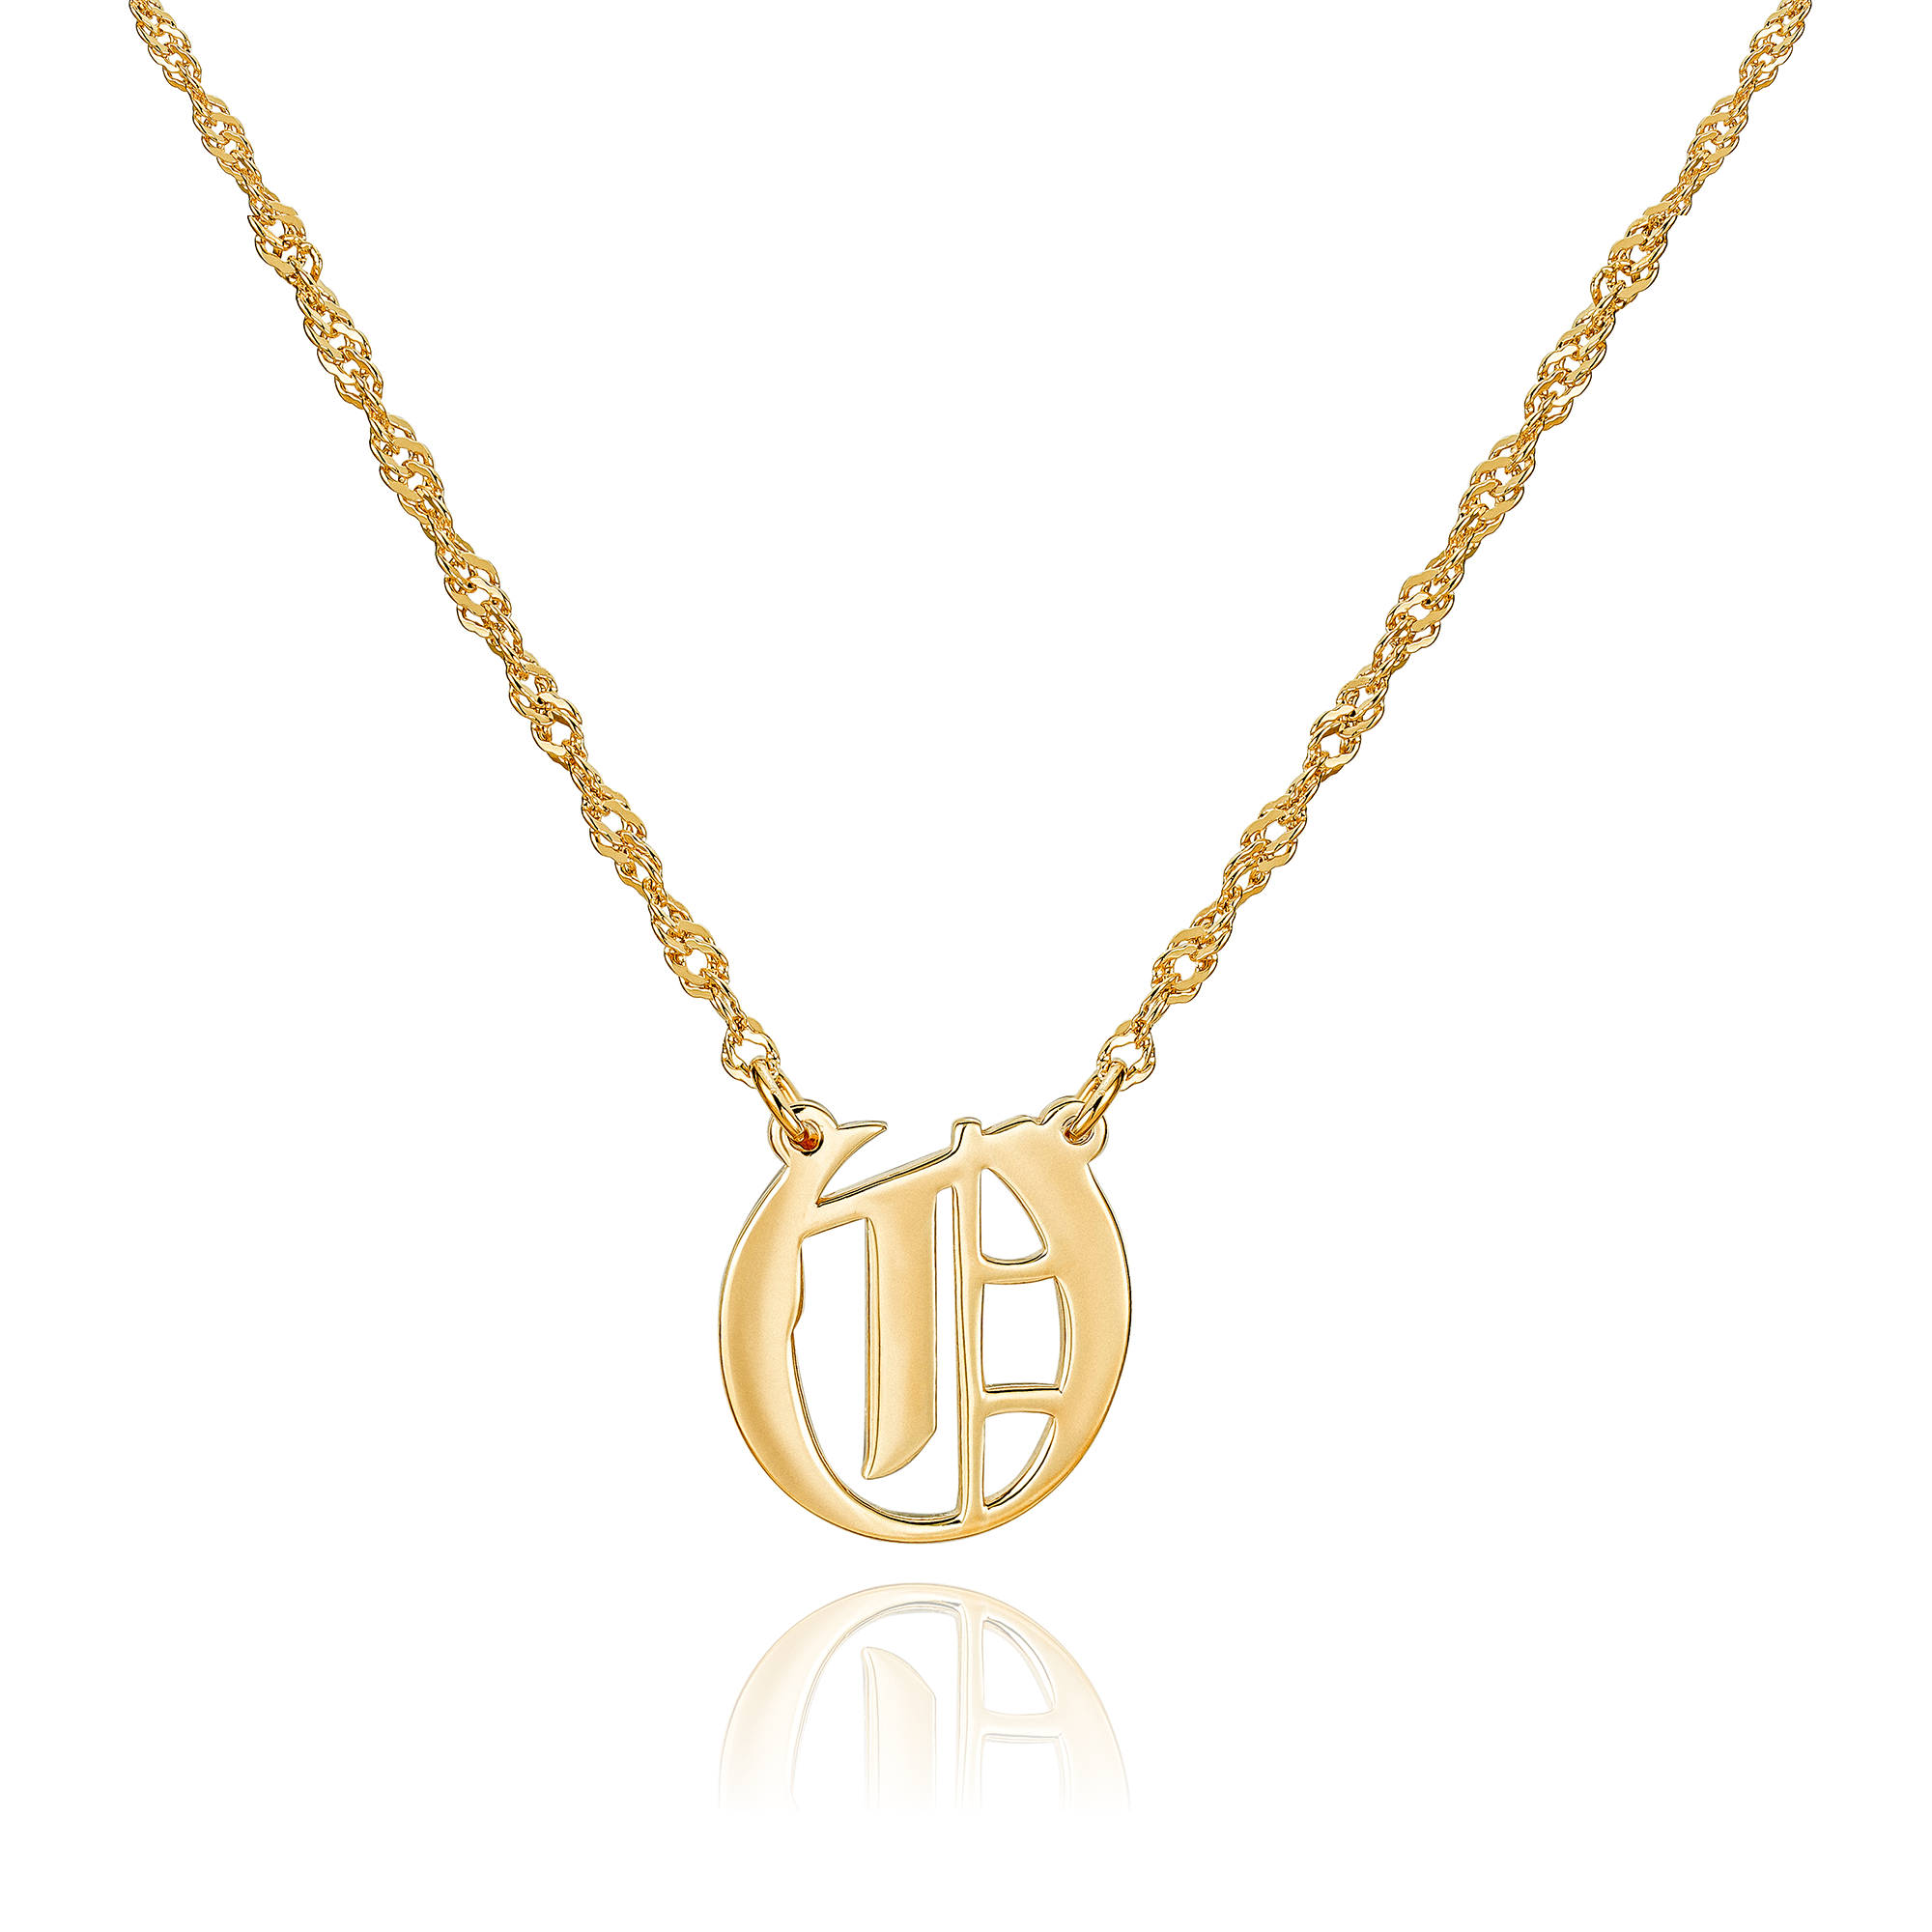 Dusted Gold 'J' Necklace by Kate Maller - NEWTWIST